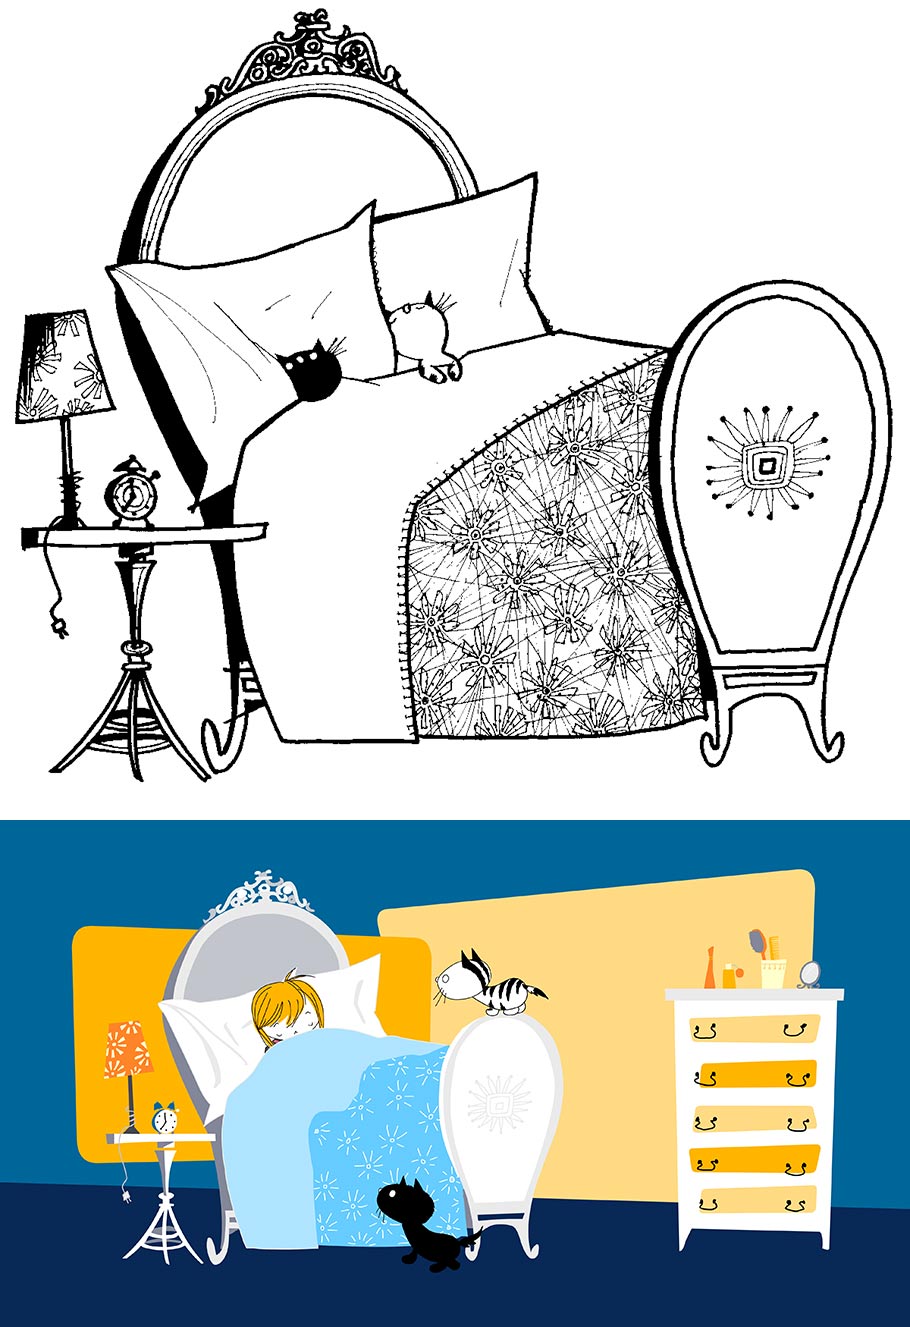 Top: Original "Pim and Pom" drawing by Fiep Westendorp (ca. 1967, ©Fiep Amsterdam bv, Fiep Westendorp Illustrations); bottom: Still from the movie "Pim and Pom: The Big Adventure" (2014)